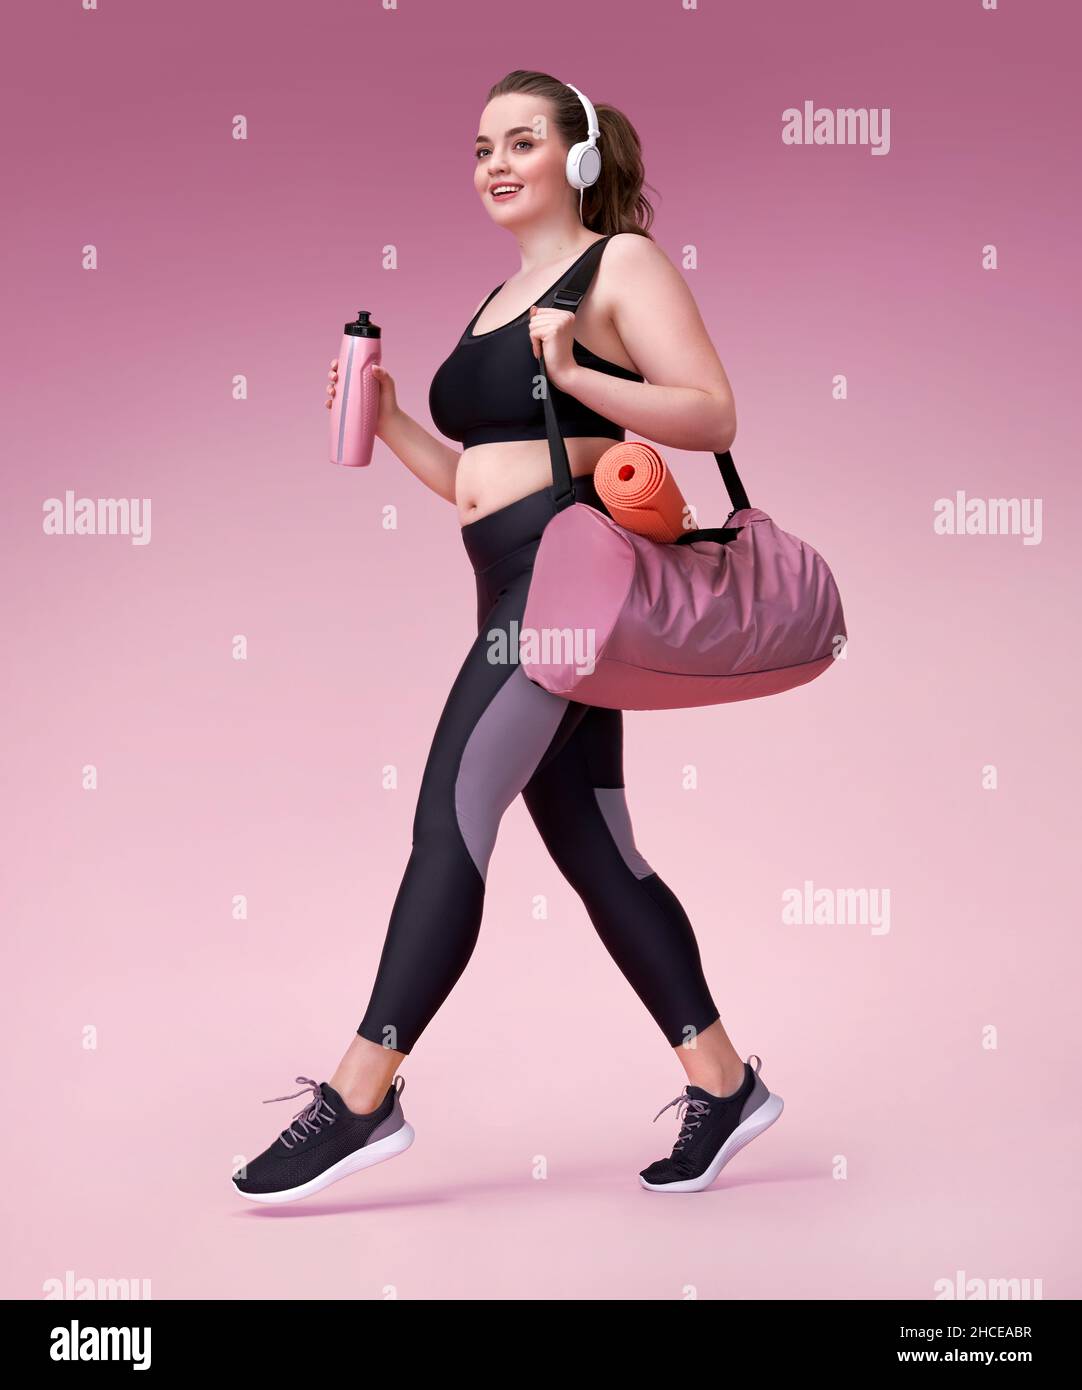 Go to training! Smiling sporty woman with sports bag and shaker. Photo of model with curvy figure in fashionable sportswear on pink background. Sports Stock Photo